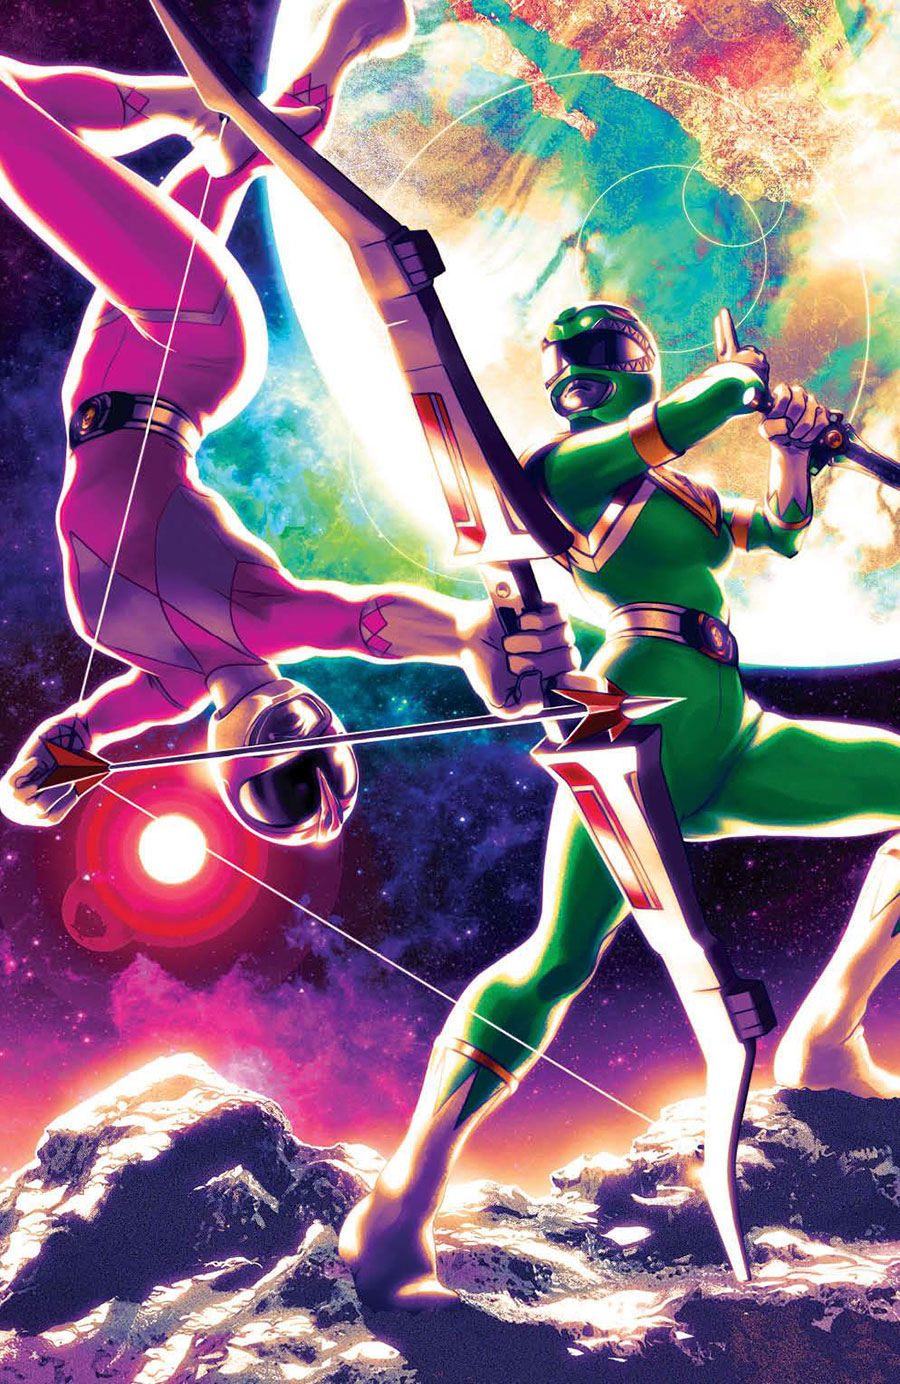 Mighty Morphin Power Rangers The Return #4 Cover C Incentive Goni Montes Variant Cover